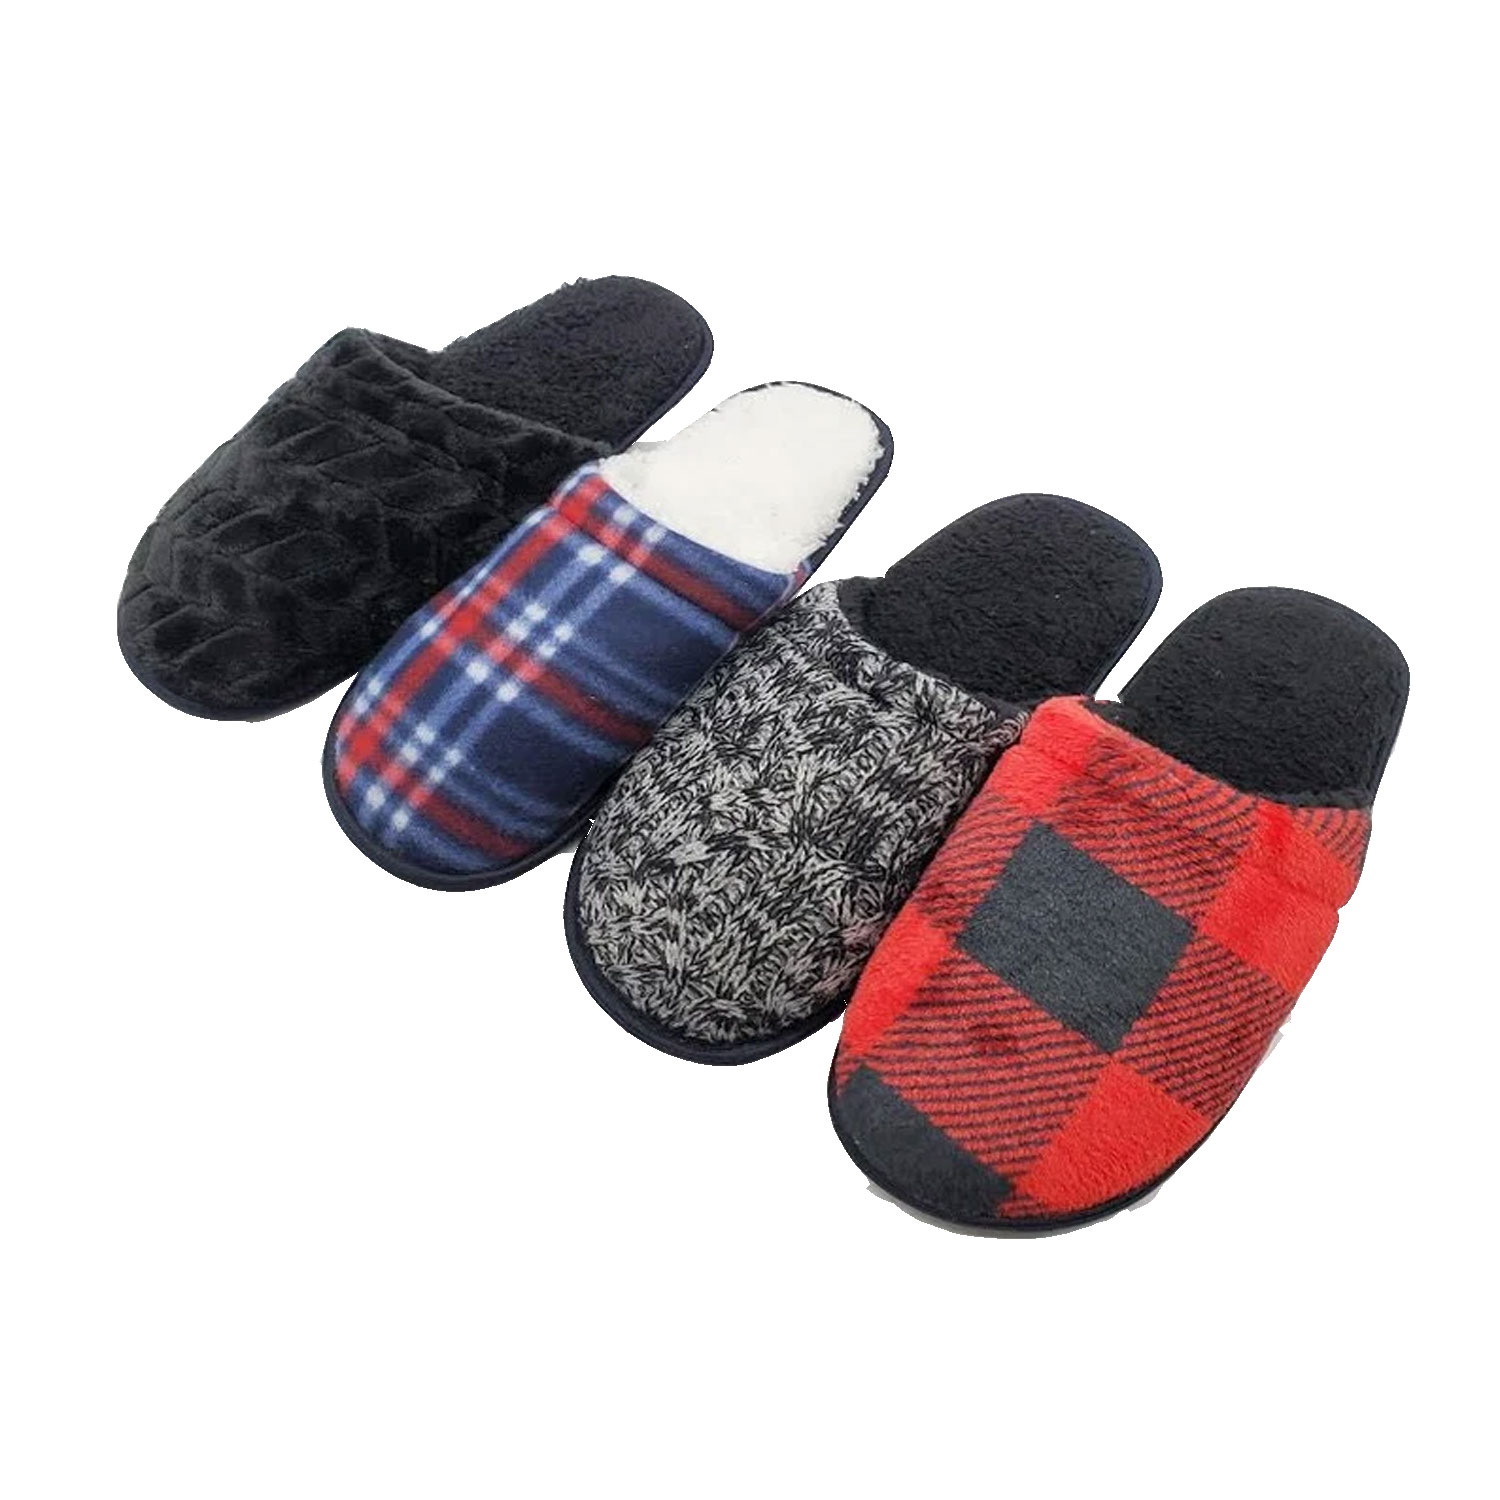 Men's Sherpa Lined Indoor Slippers Comfy Thermal Insulated House slippers